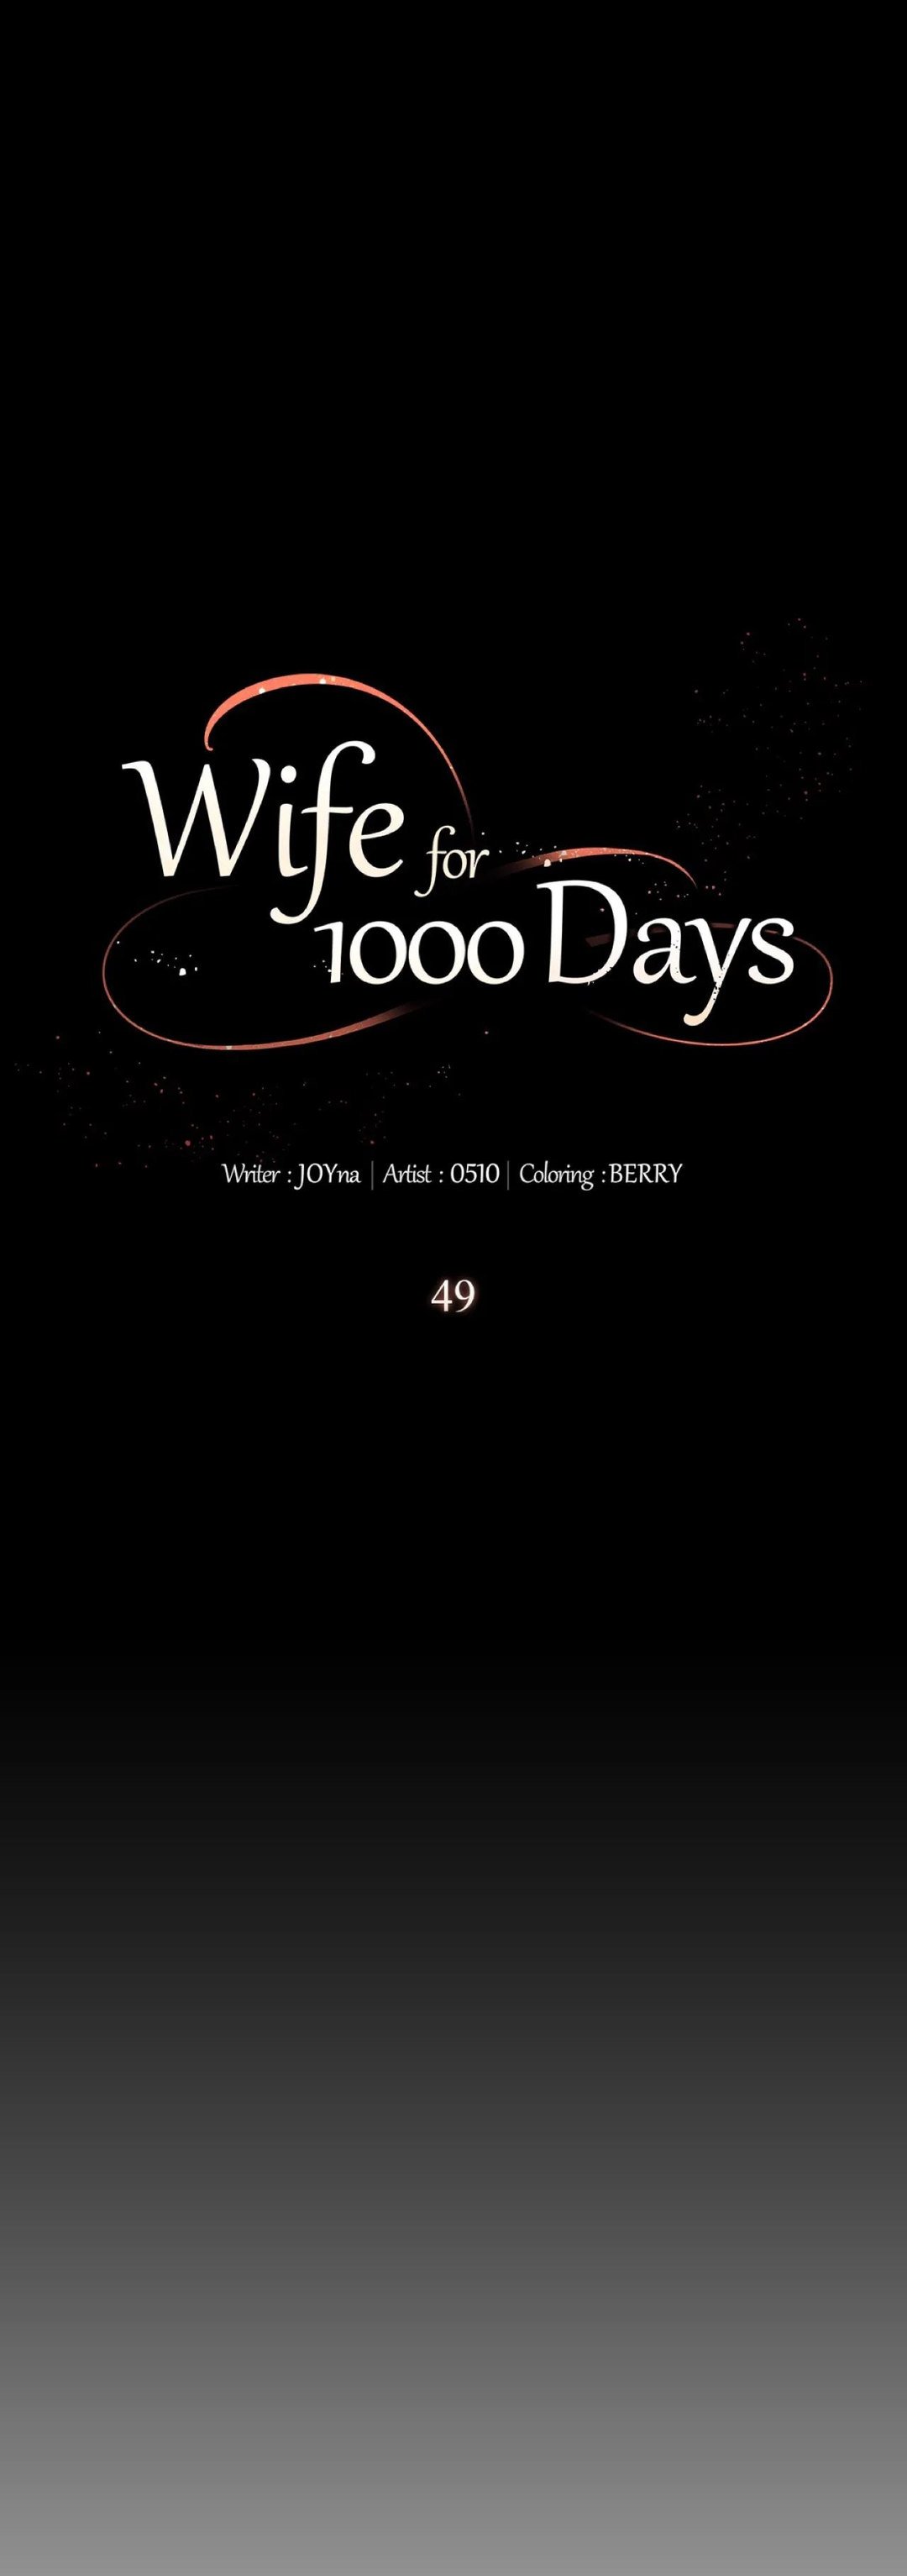 wife-for-1000-days-chap-49-25